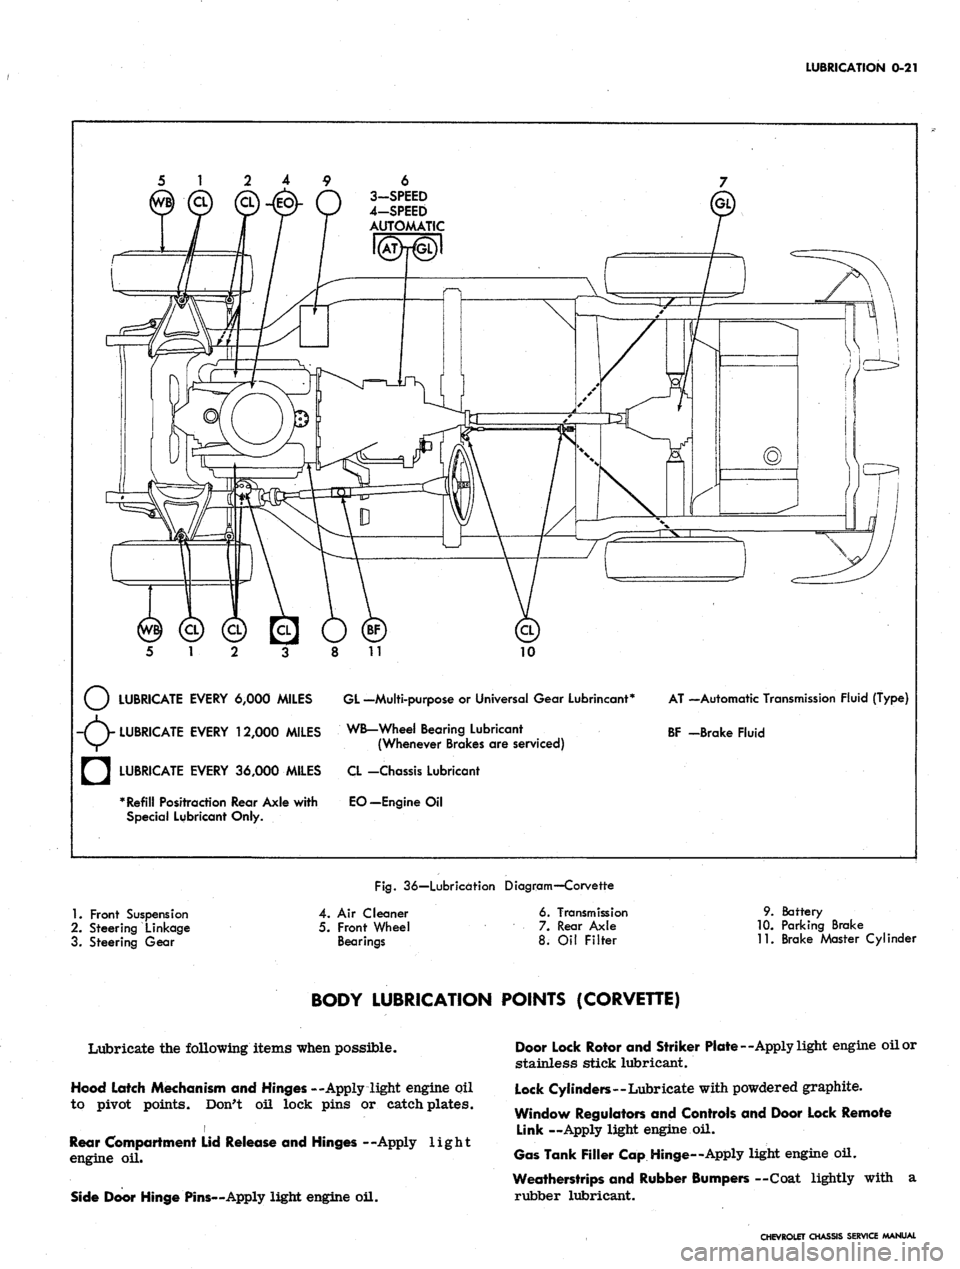 CHEVROLET CAMARO 1967 1.G Chassis User Guide 
LUBRICATION
 0-21

6

3-SPEED

4-SPEED

AUTOMATIC

10

LUBRICATE EVERY 6,000 MILES GL -Multi-purpose
 or
 Universal Gear Lubrincant*

-(V LUBRICATE EVERY 12,000 MILES WB-Wheel Bearing Lubricant

V/^ 